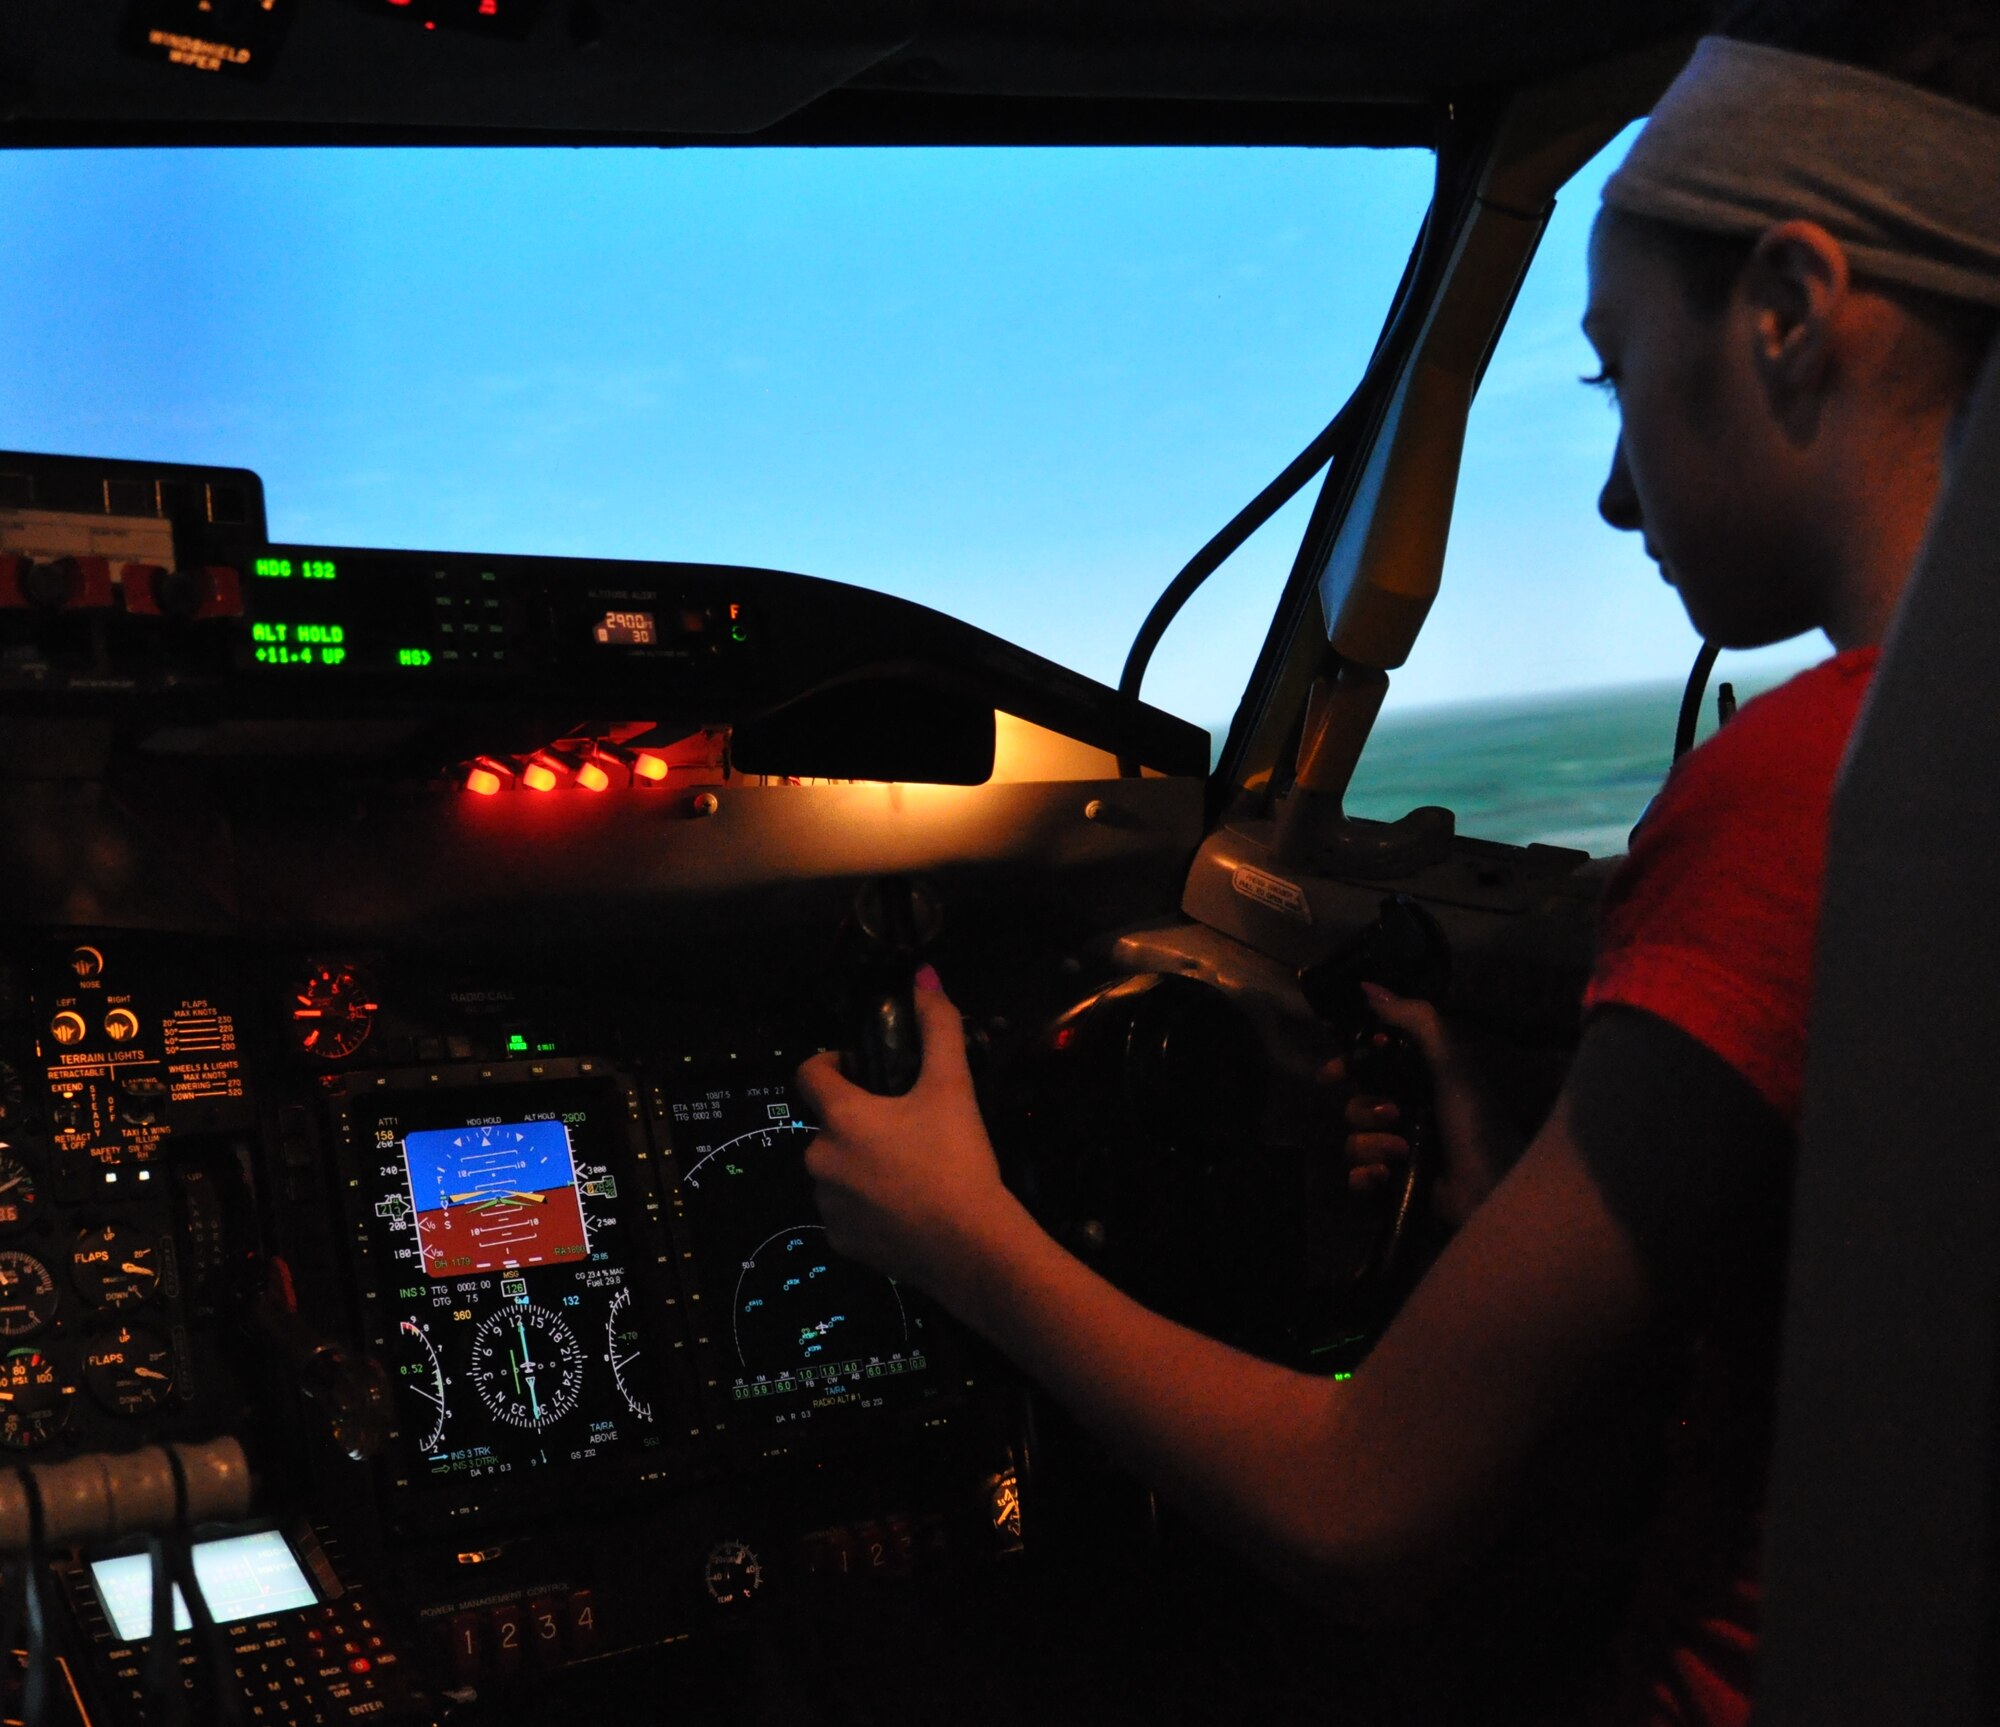 Mollee Francis, a seventh grader from Alfonza W. Davis Middle School in Omaha, Neb., flies an RC-135 OFT simulator at Offutt Air Force Base Nov. 3, 2015. The program, coordinated through the Alfonza W. Davis Chapter of Tuskegee Airmen Incorporated, hopes to encourage middle school students to form an interest in the STEM subjects. (U.S. Air Force photo by Senior Airman Rachel Hammes)